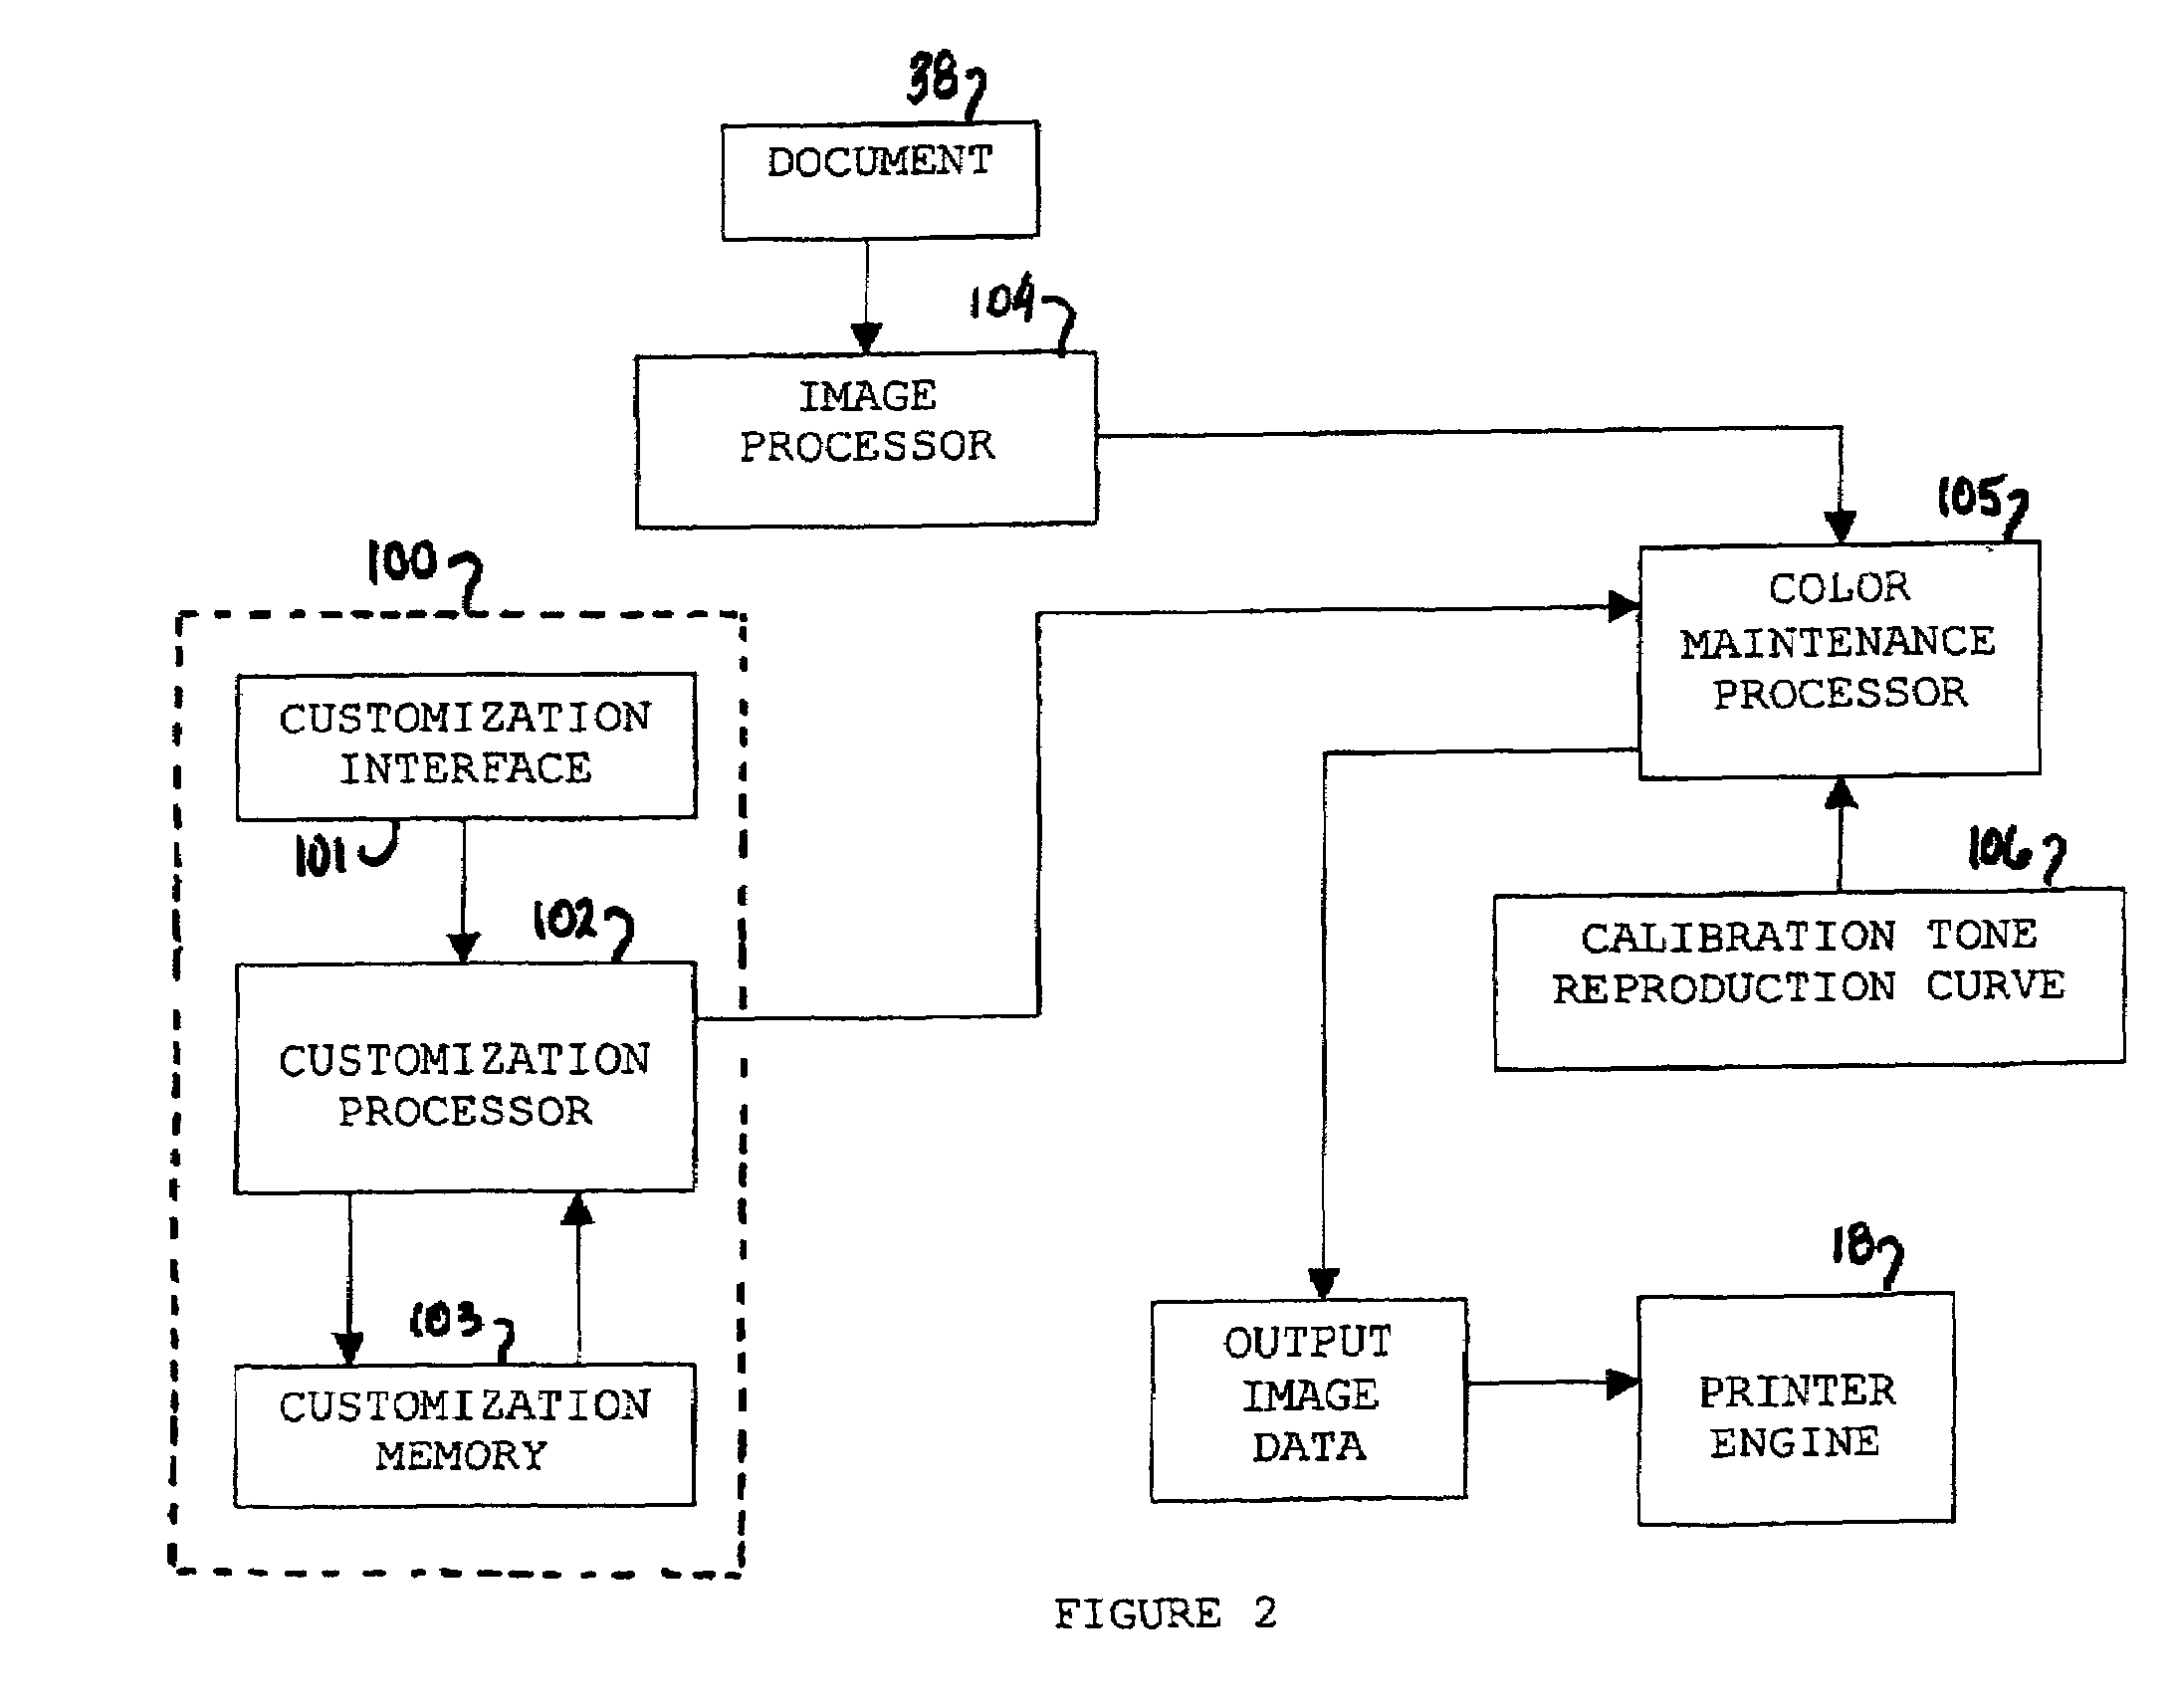 Printer image processing system with customized tone reproduction curves